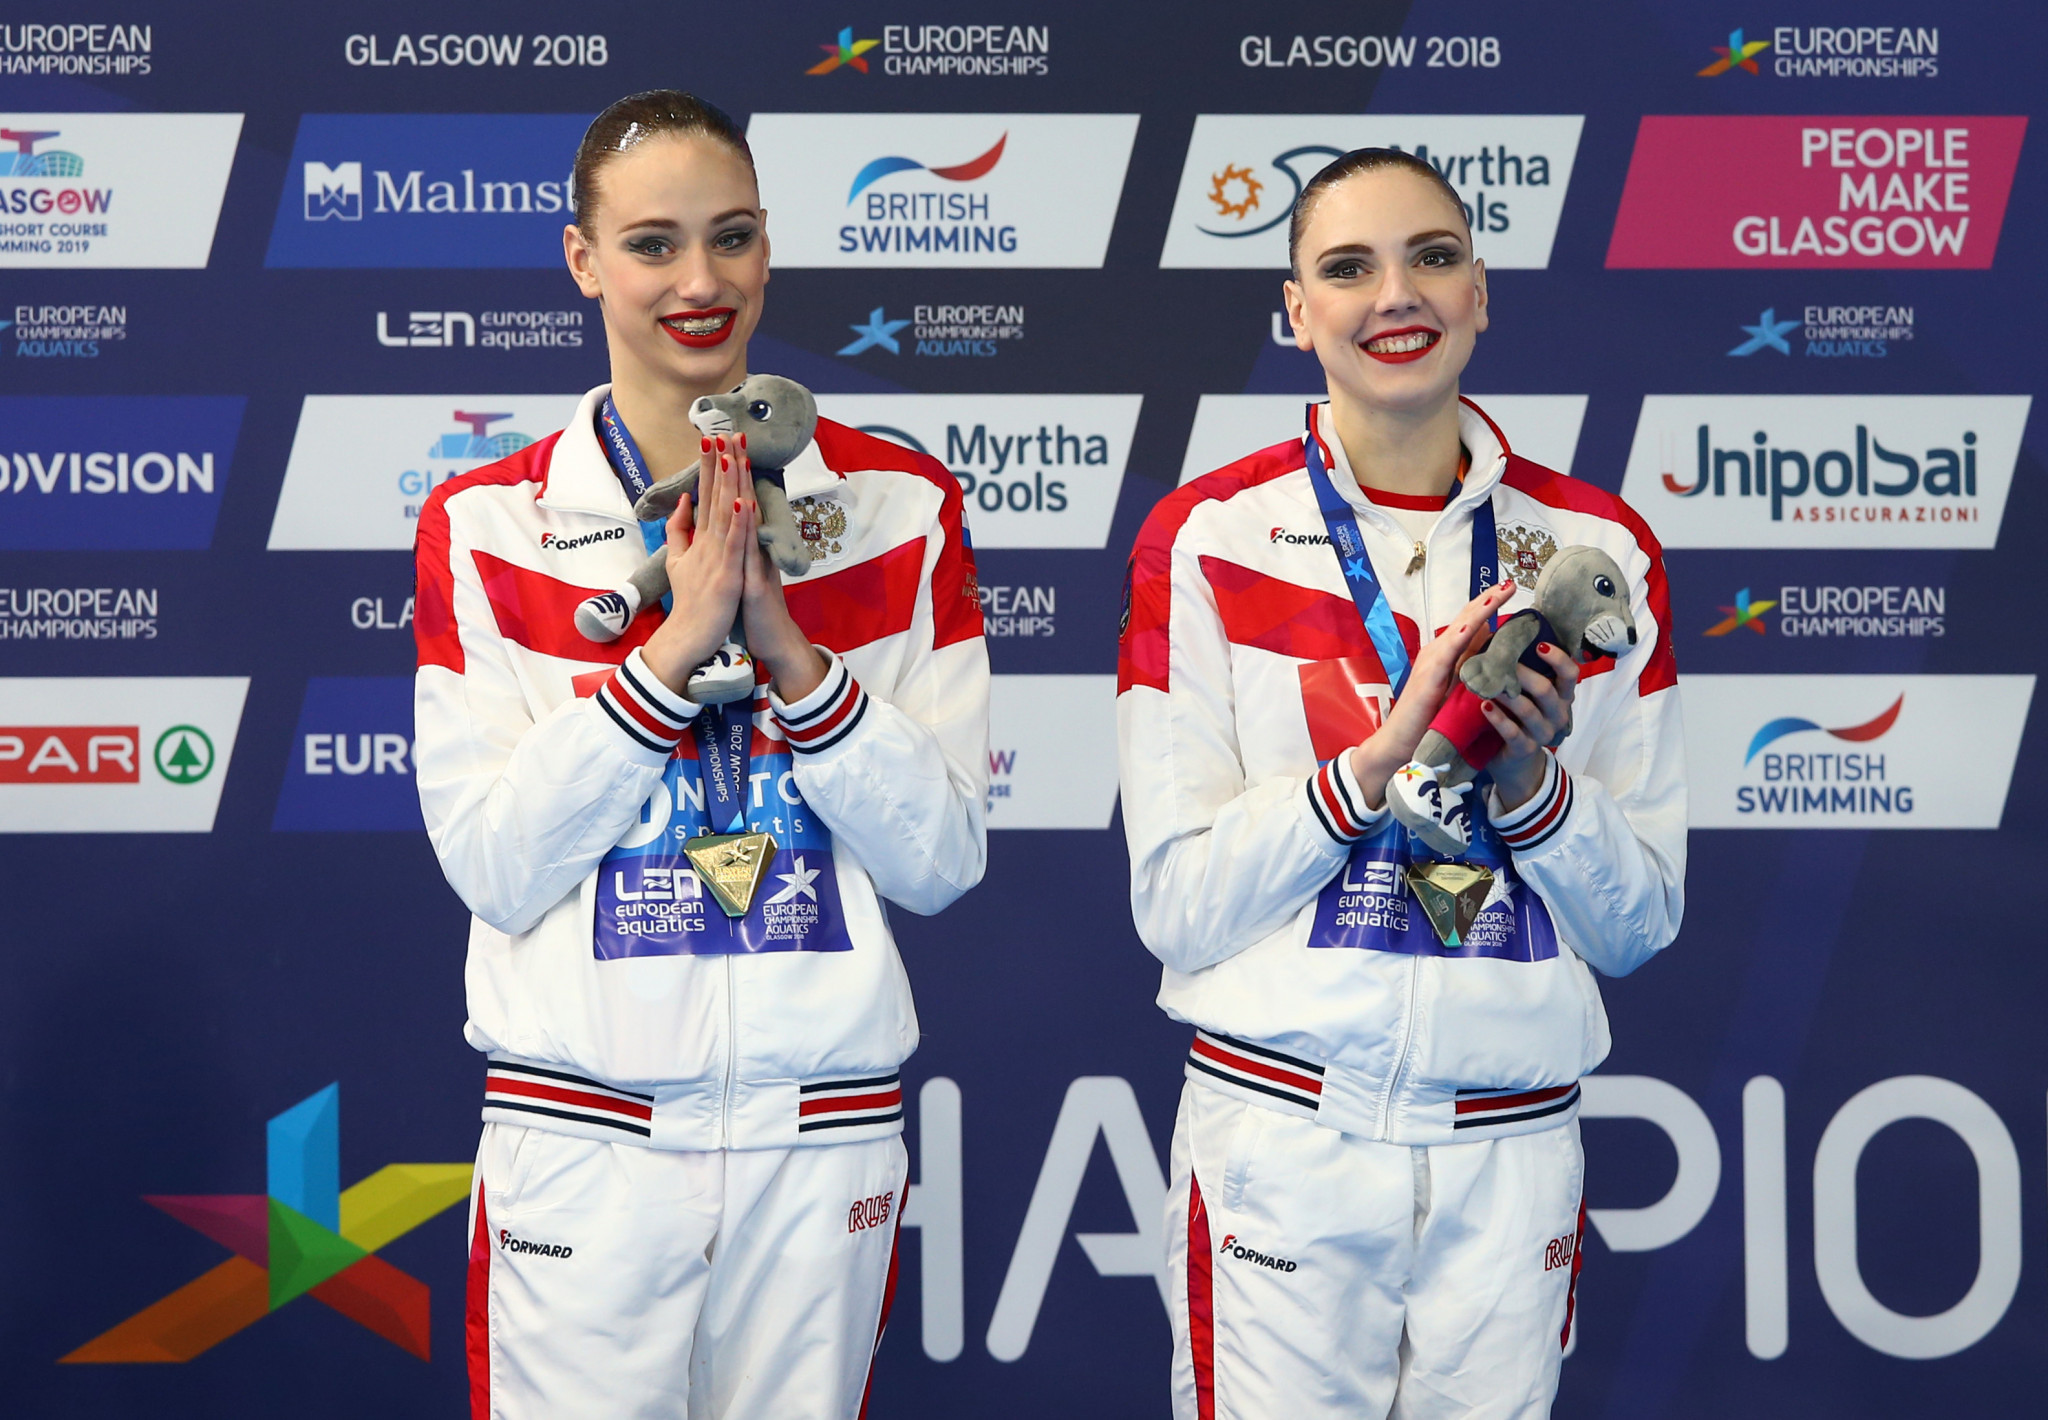 Svetlana Kolesnichenko and Varvara Subbotina claimed the first of Russia's two European Championship gold medals in artistic swimming today, winning the duet technical routine event ©Getty Images